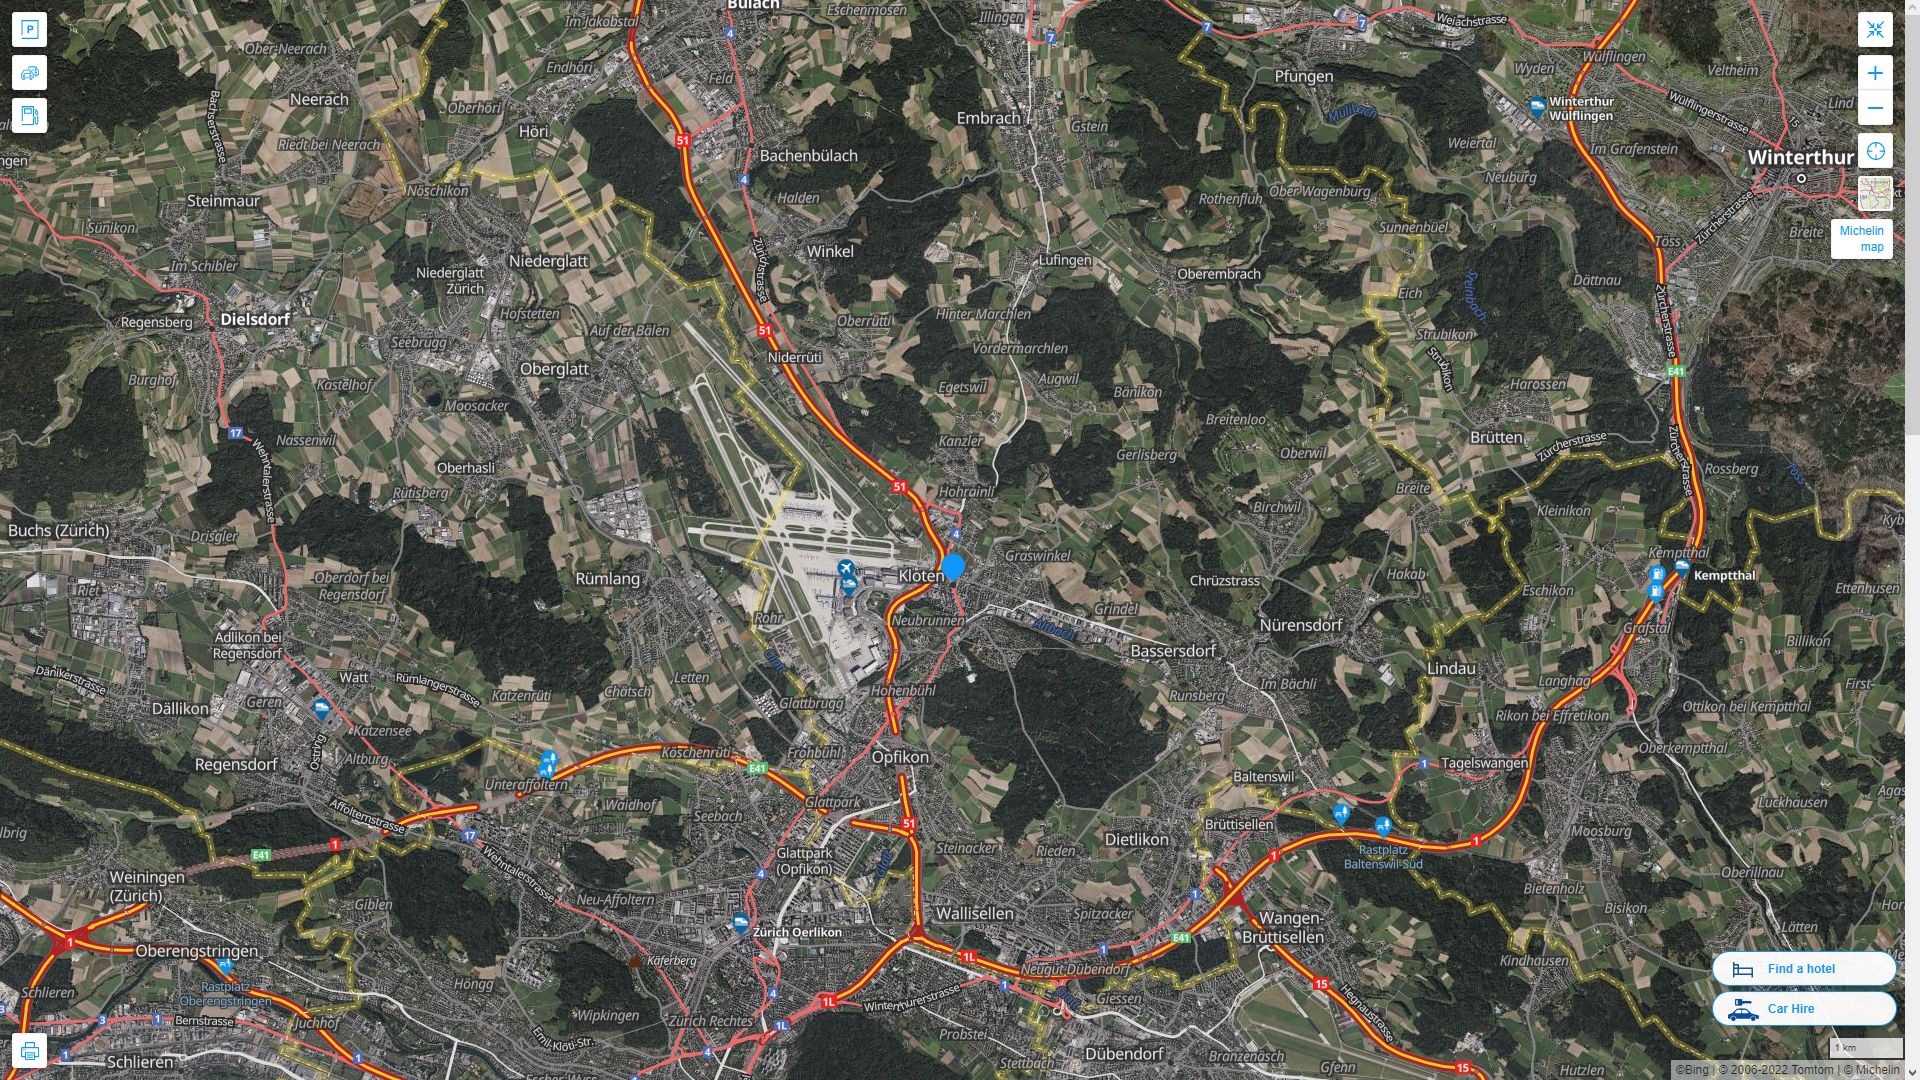 Kloten Highway and Road Map with Satellite View